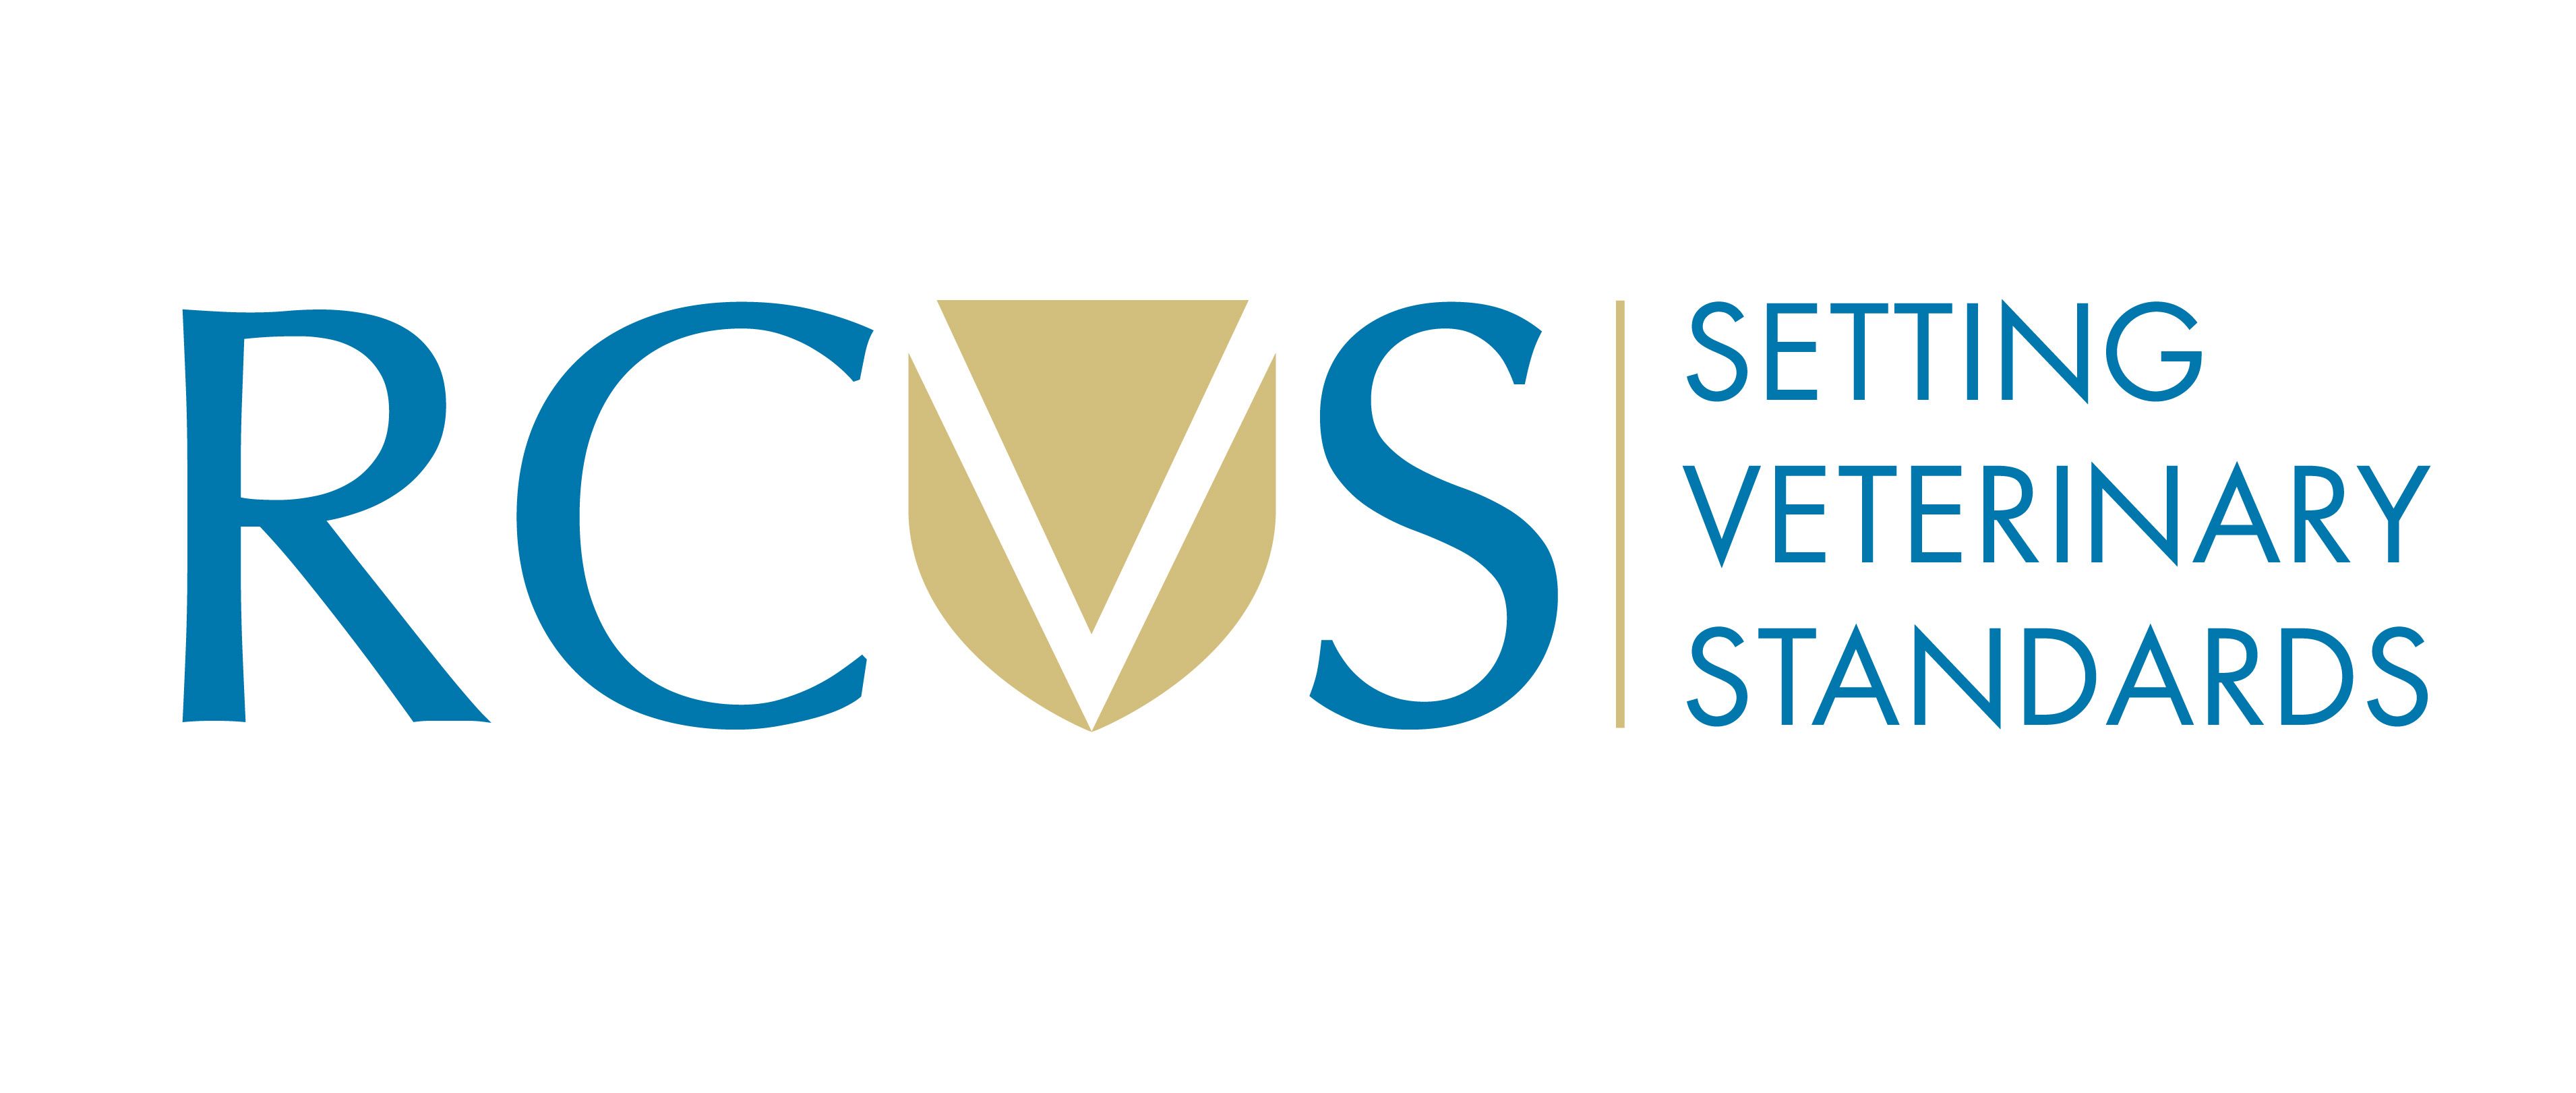 London calling as RCVS promotes graduate development programme at upcoming conference